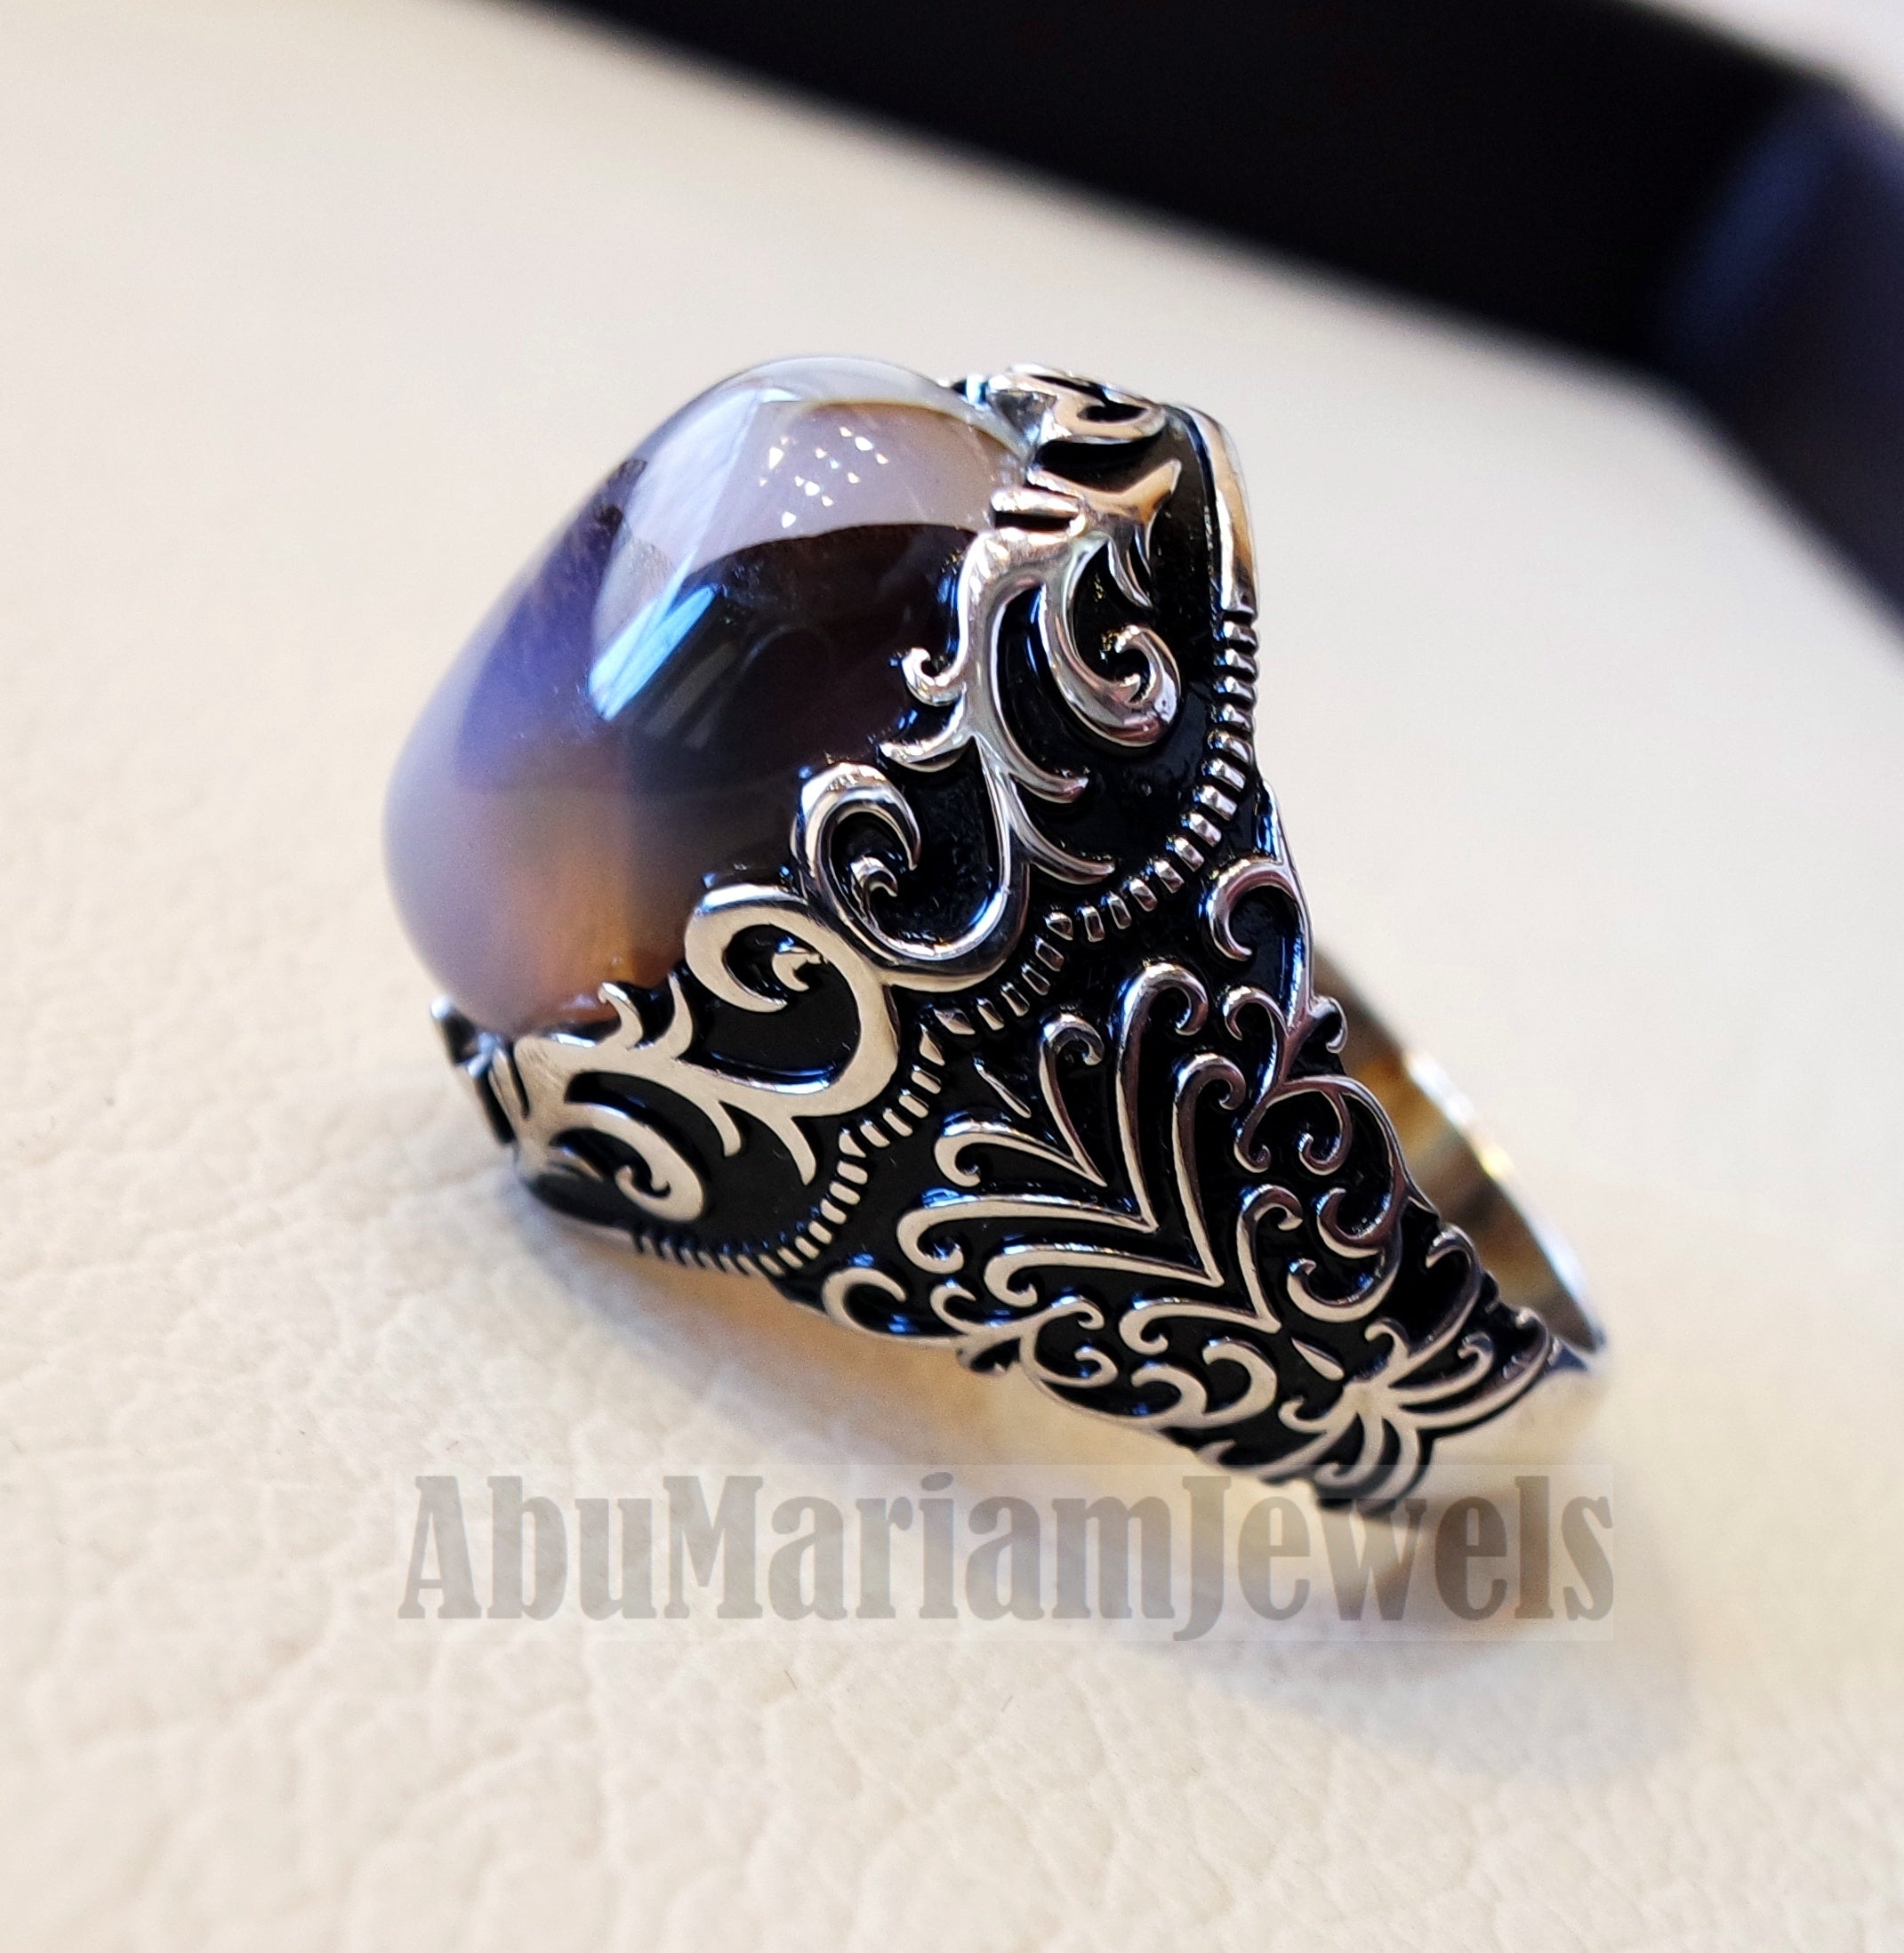 aqeeq natural agate Yamani multi color oval gem man ring sterling silver antique style fast shipping